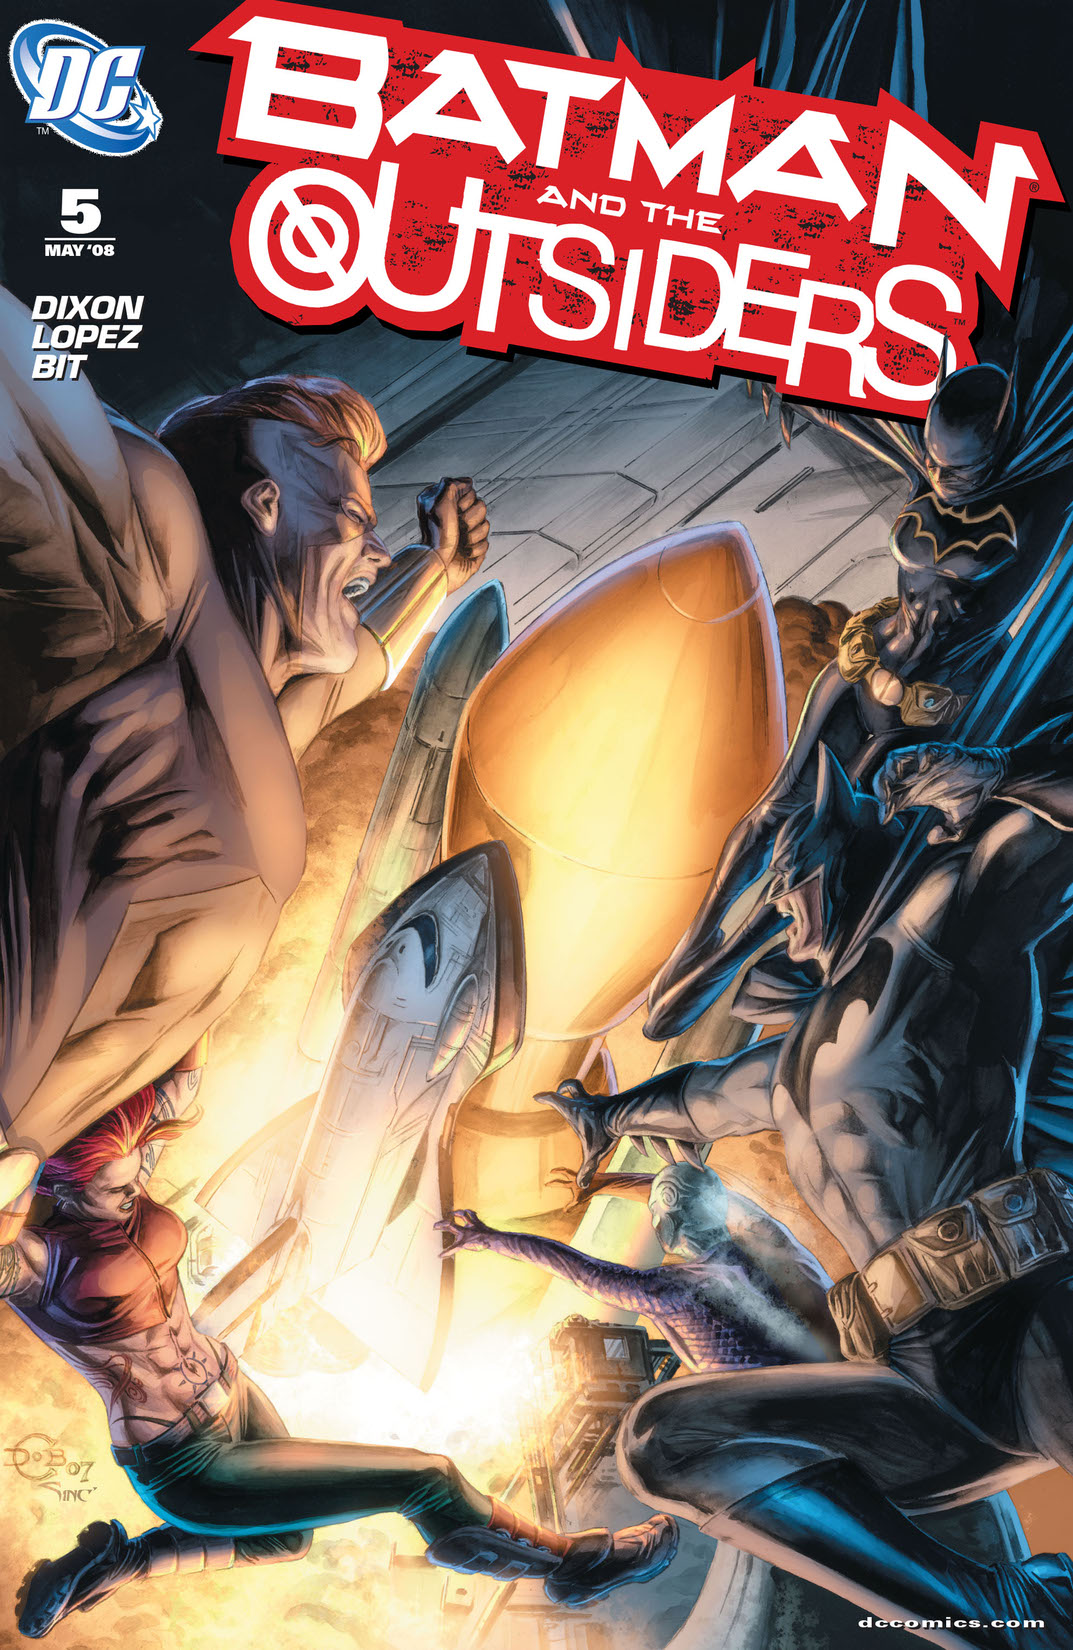 Batman and the Outsiders (2007-) #5 preview images